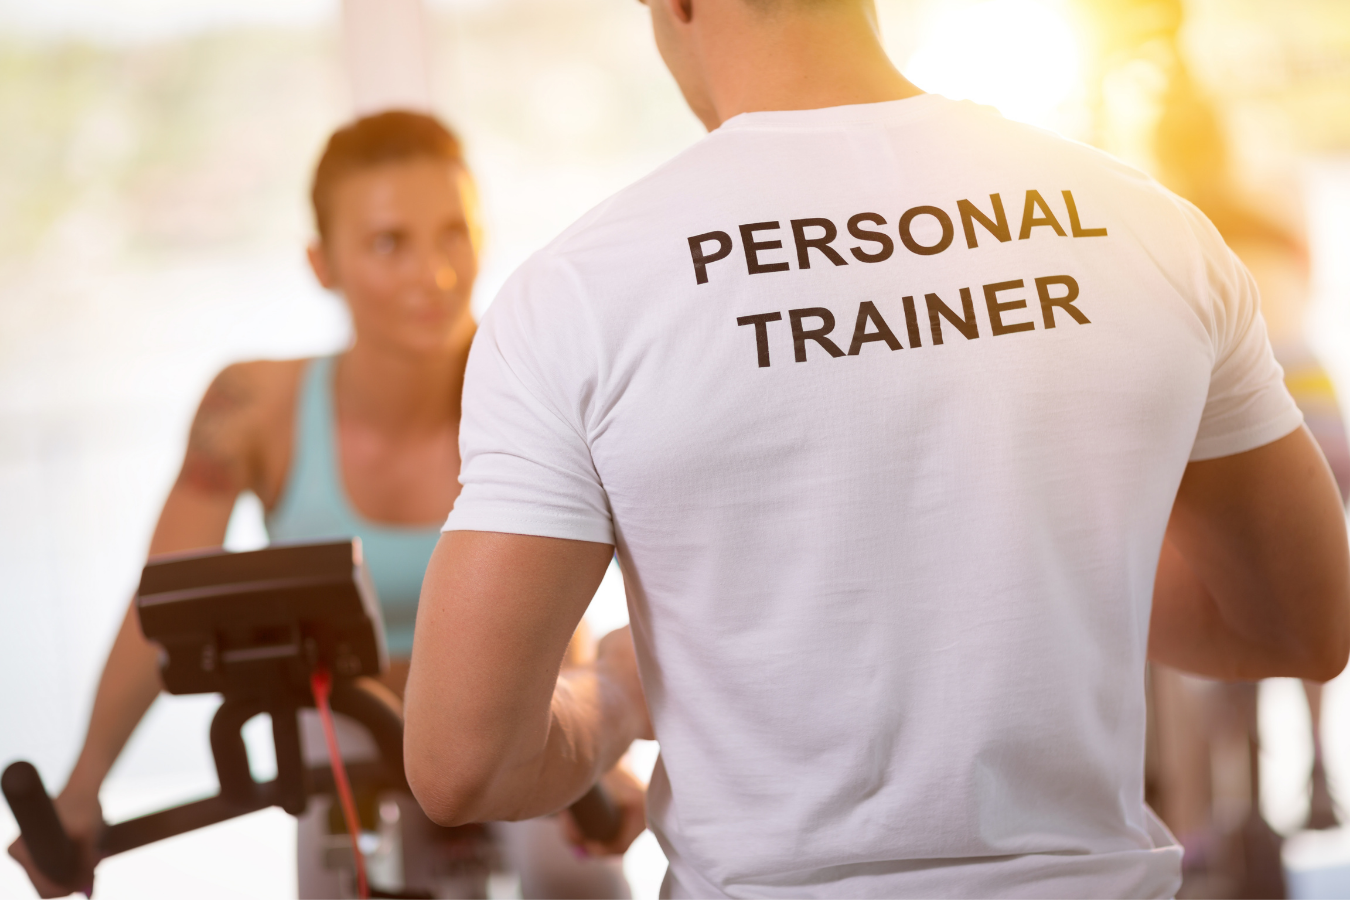 a man wearing a personal trainer shirt is helping a woman on an exercise bike